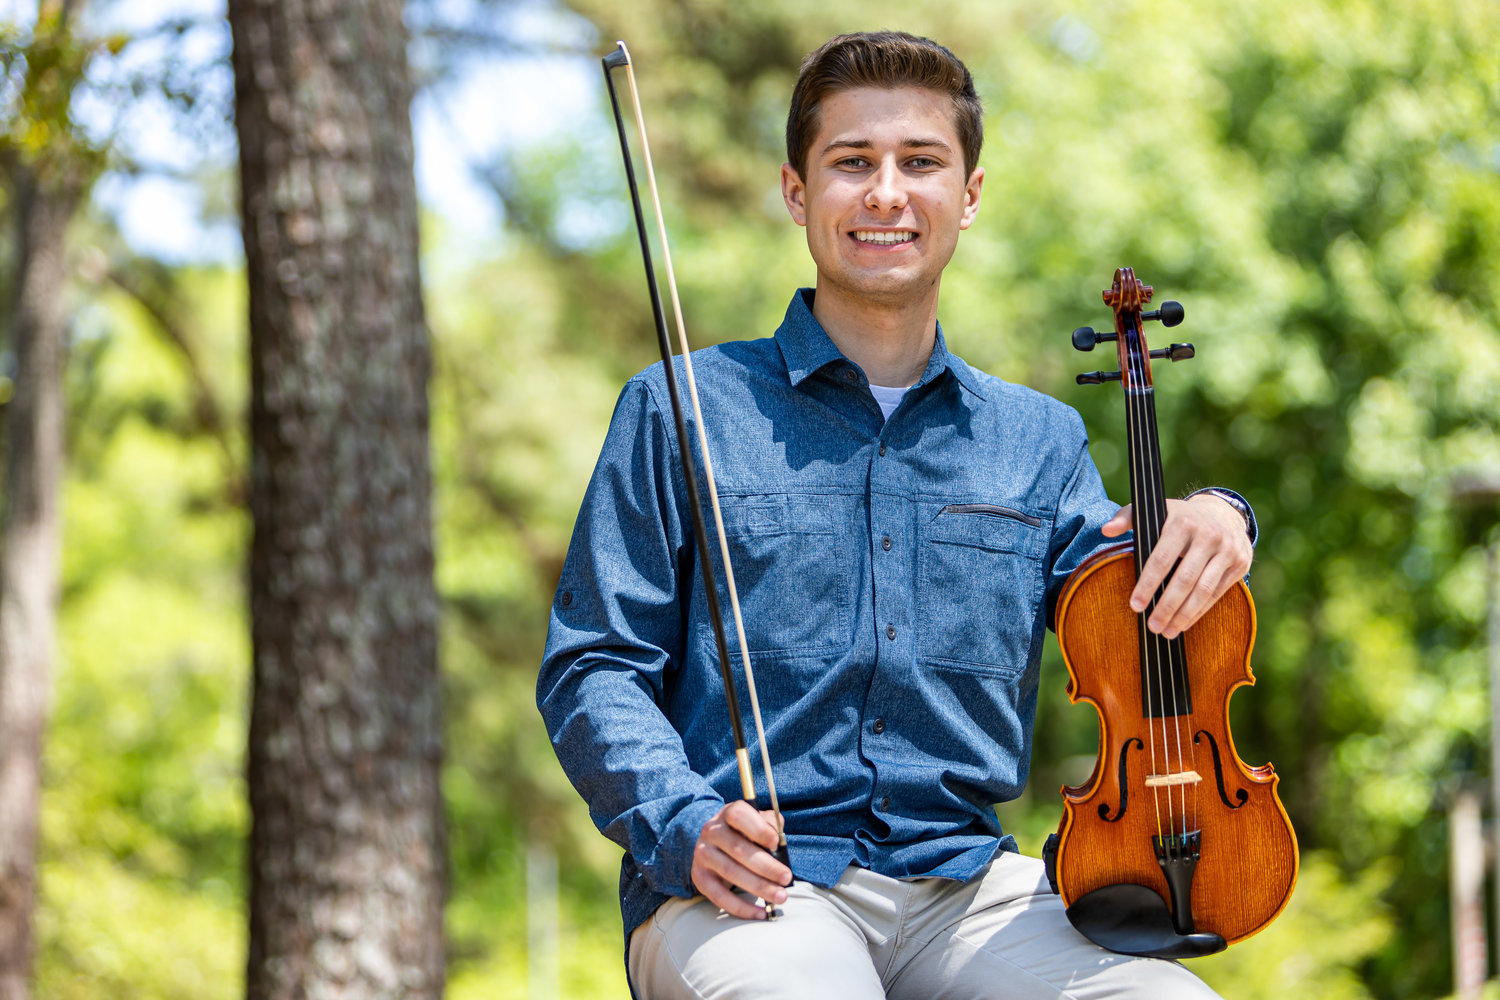 Jefferson Skinner will graduate from Cross Creek Early College High School this year. Outside school, he was the concertmaster and a soloist of the Fayetteville Symphony Youth Orchestra’s string and full orchestras.